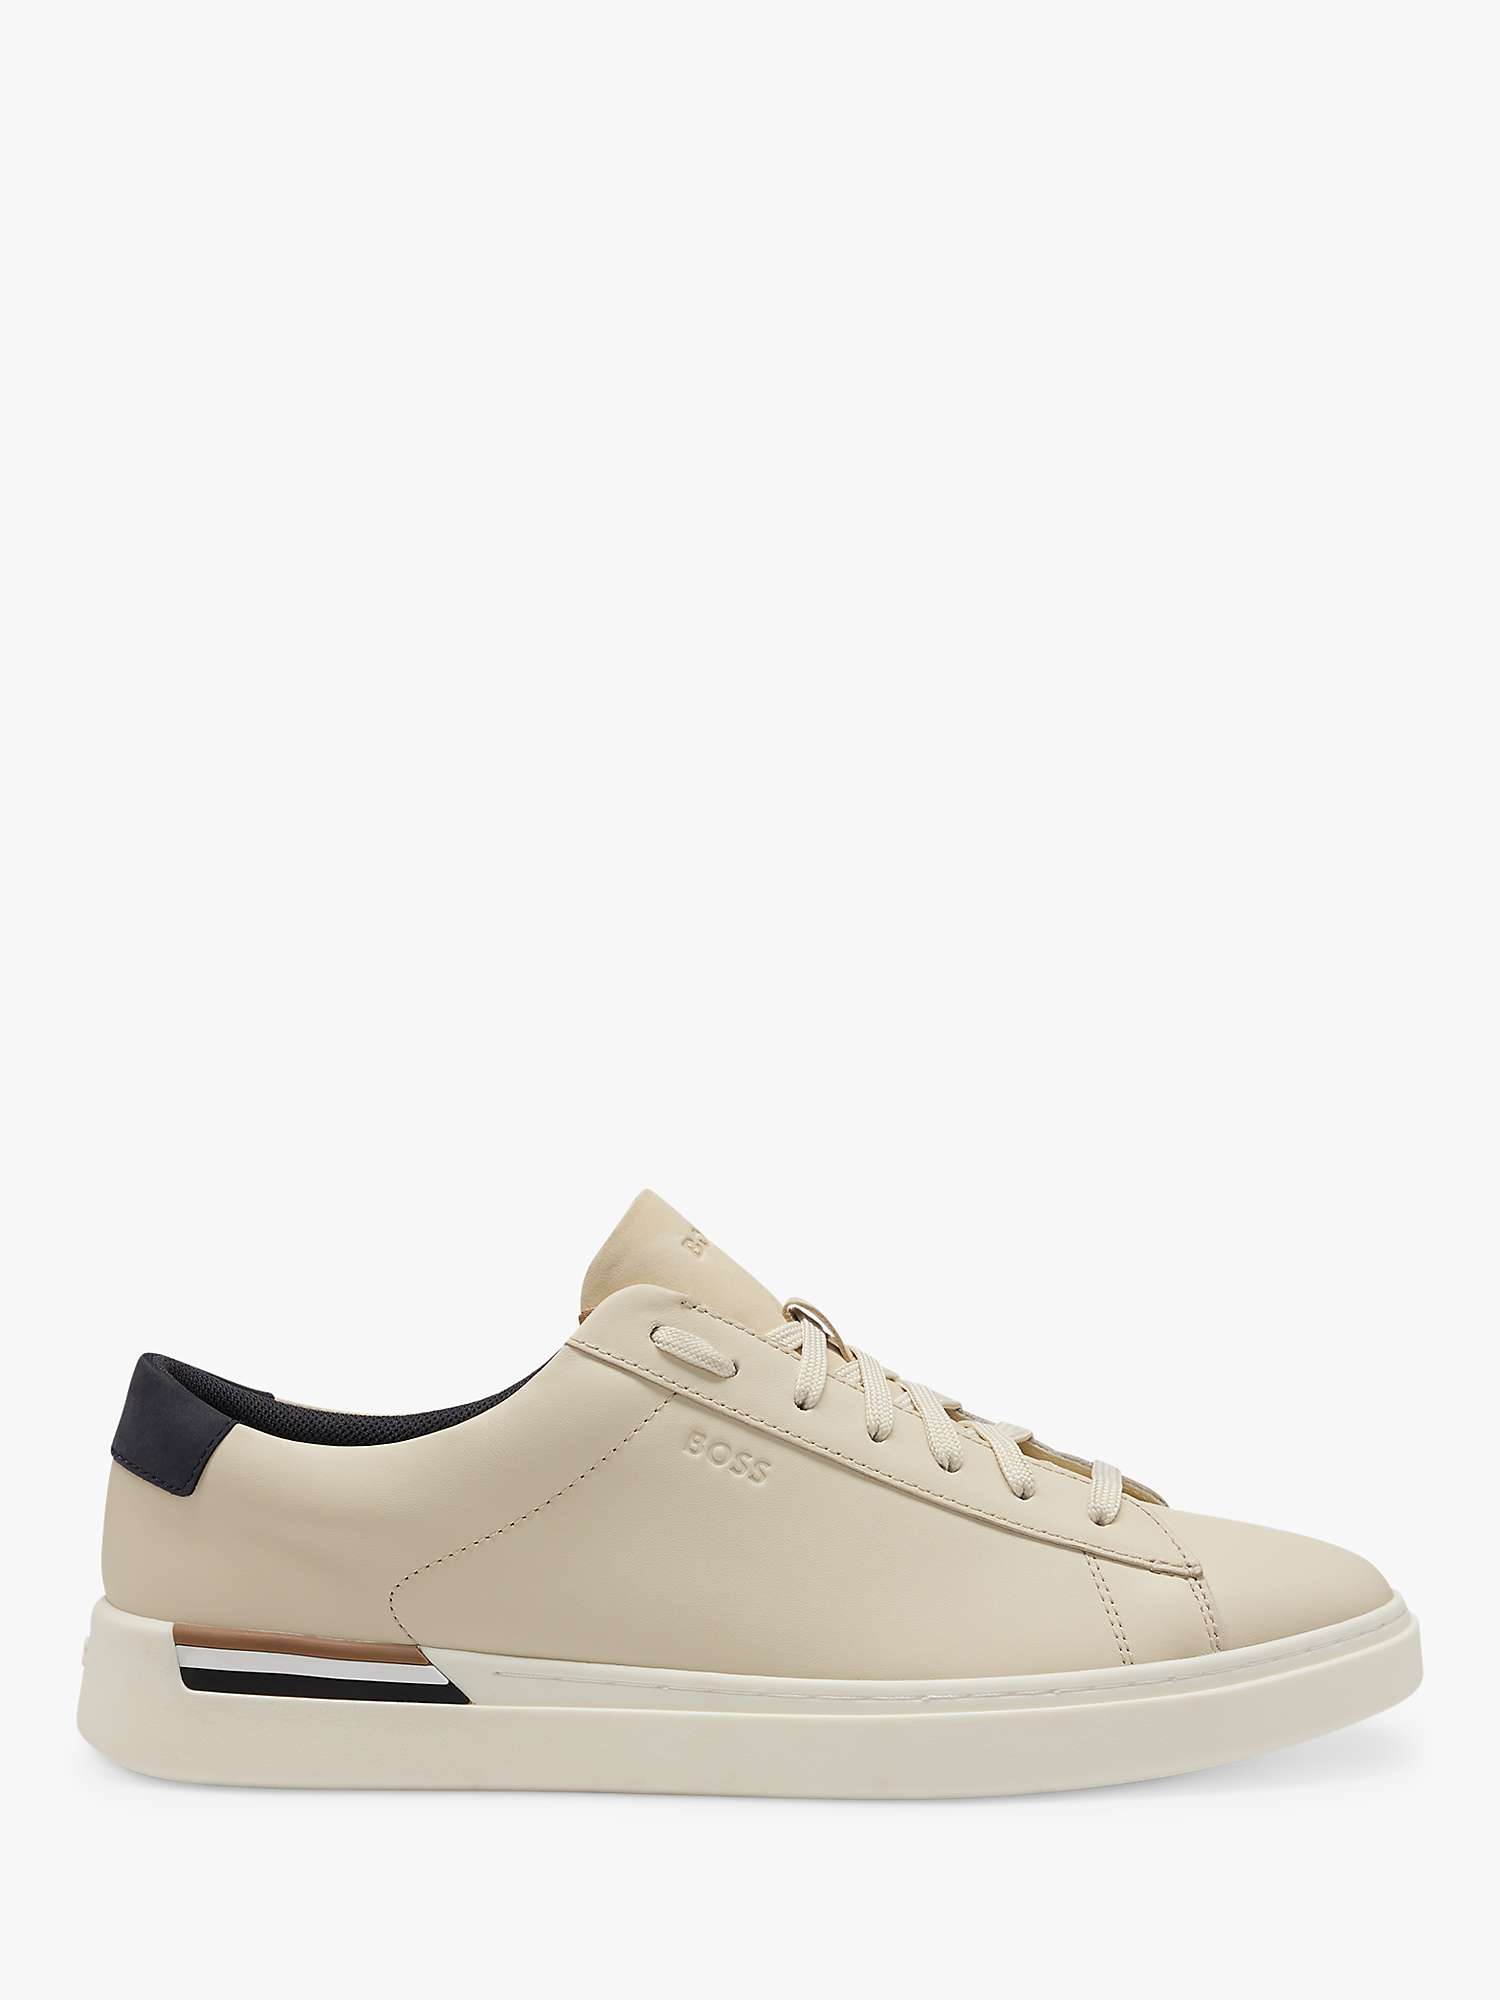 Buy BOSS Clint Basic Trainers Online at johnlewis.com